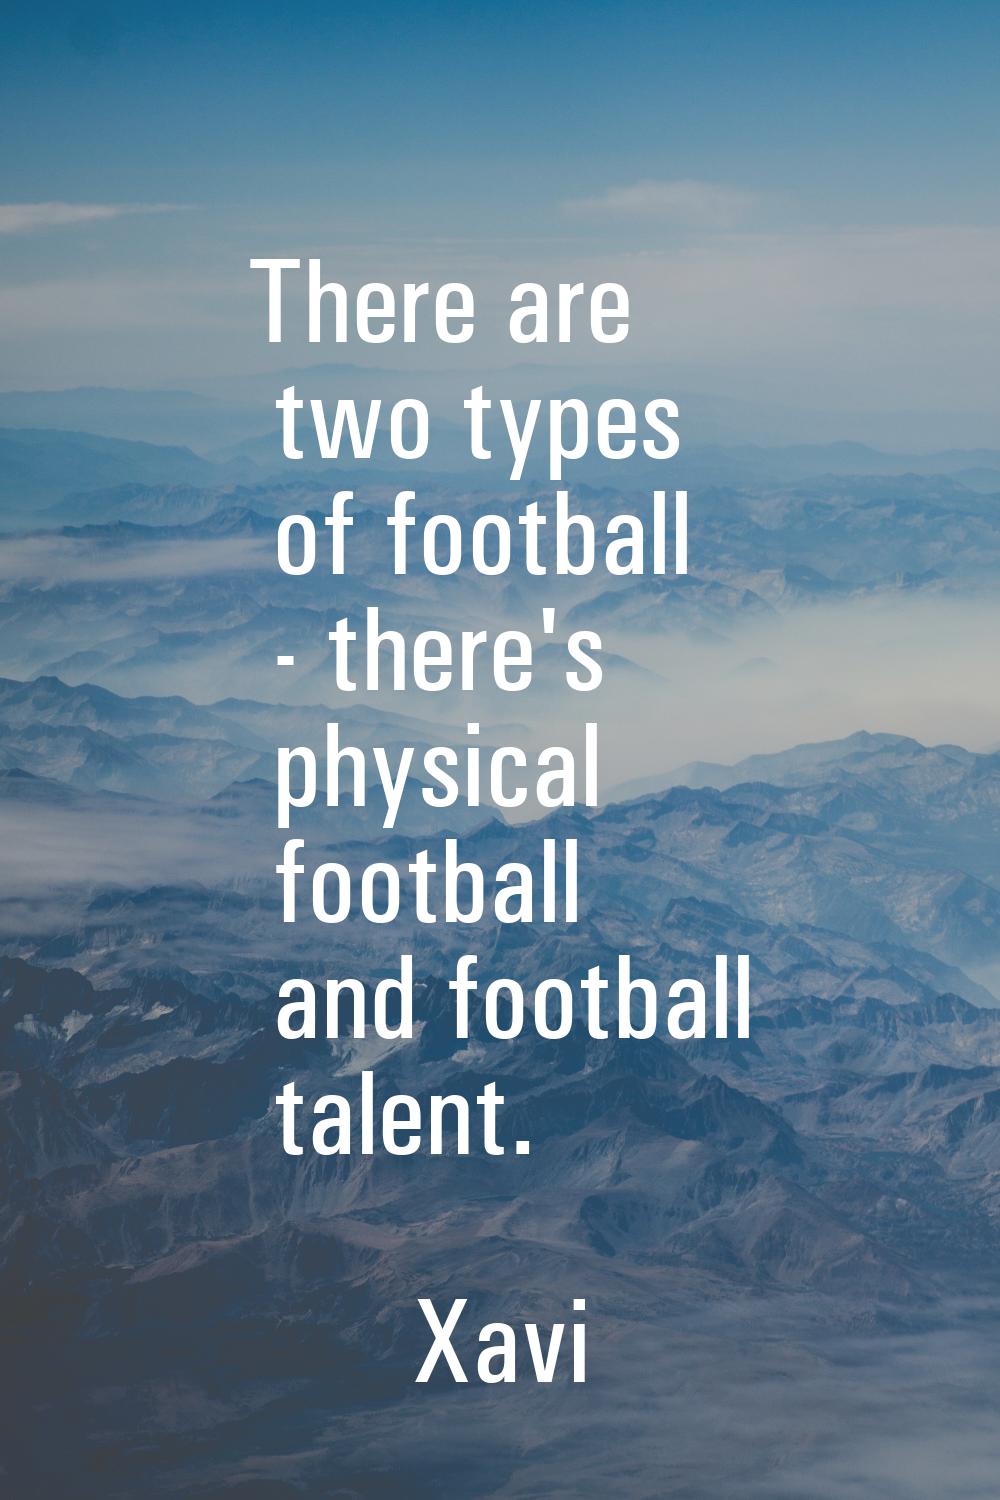 There are two types of football - there's physical football and football talent.